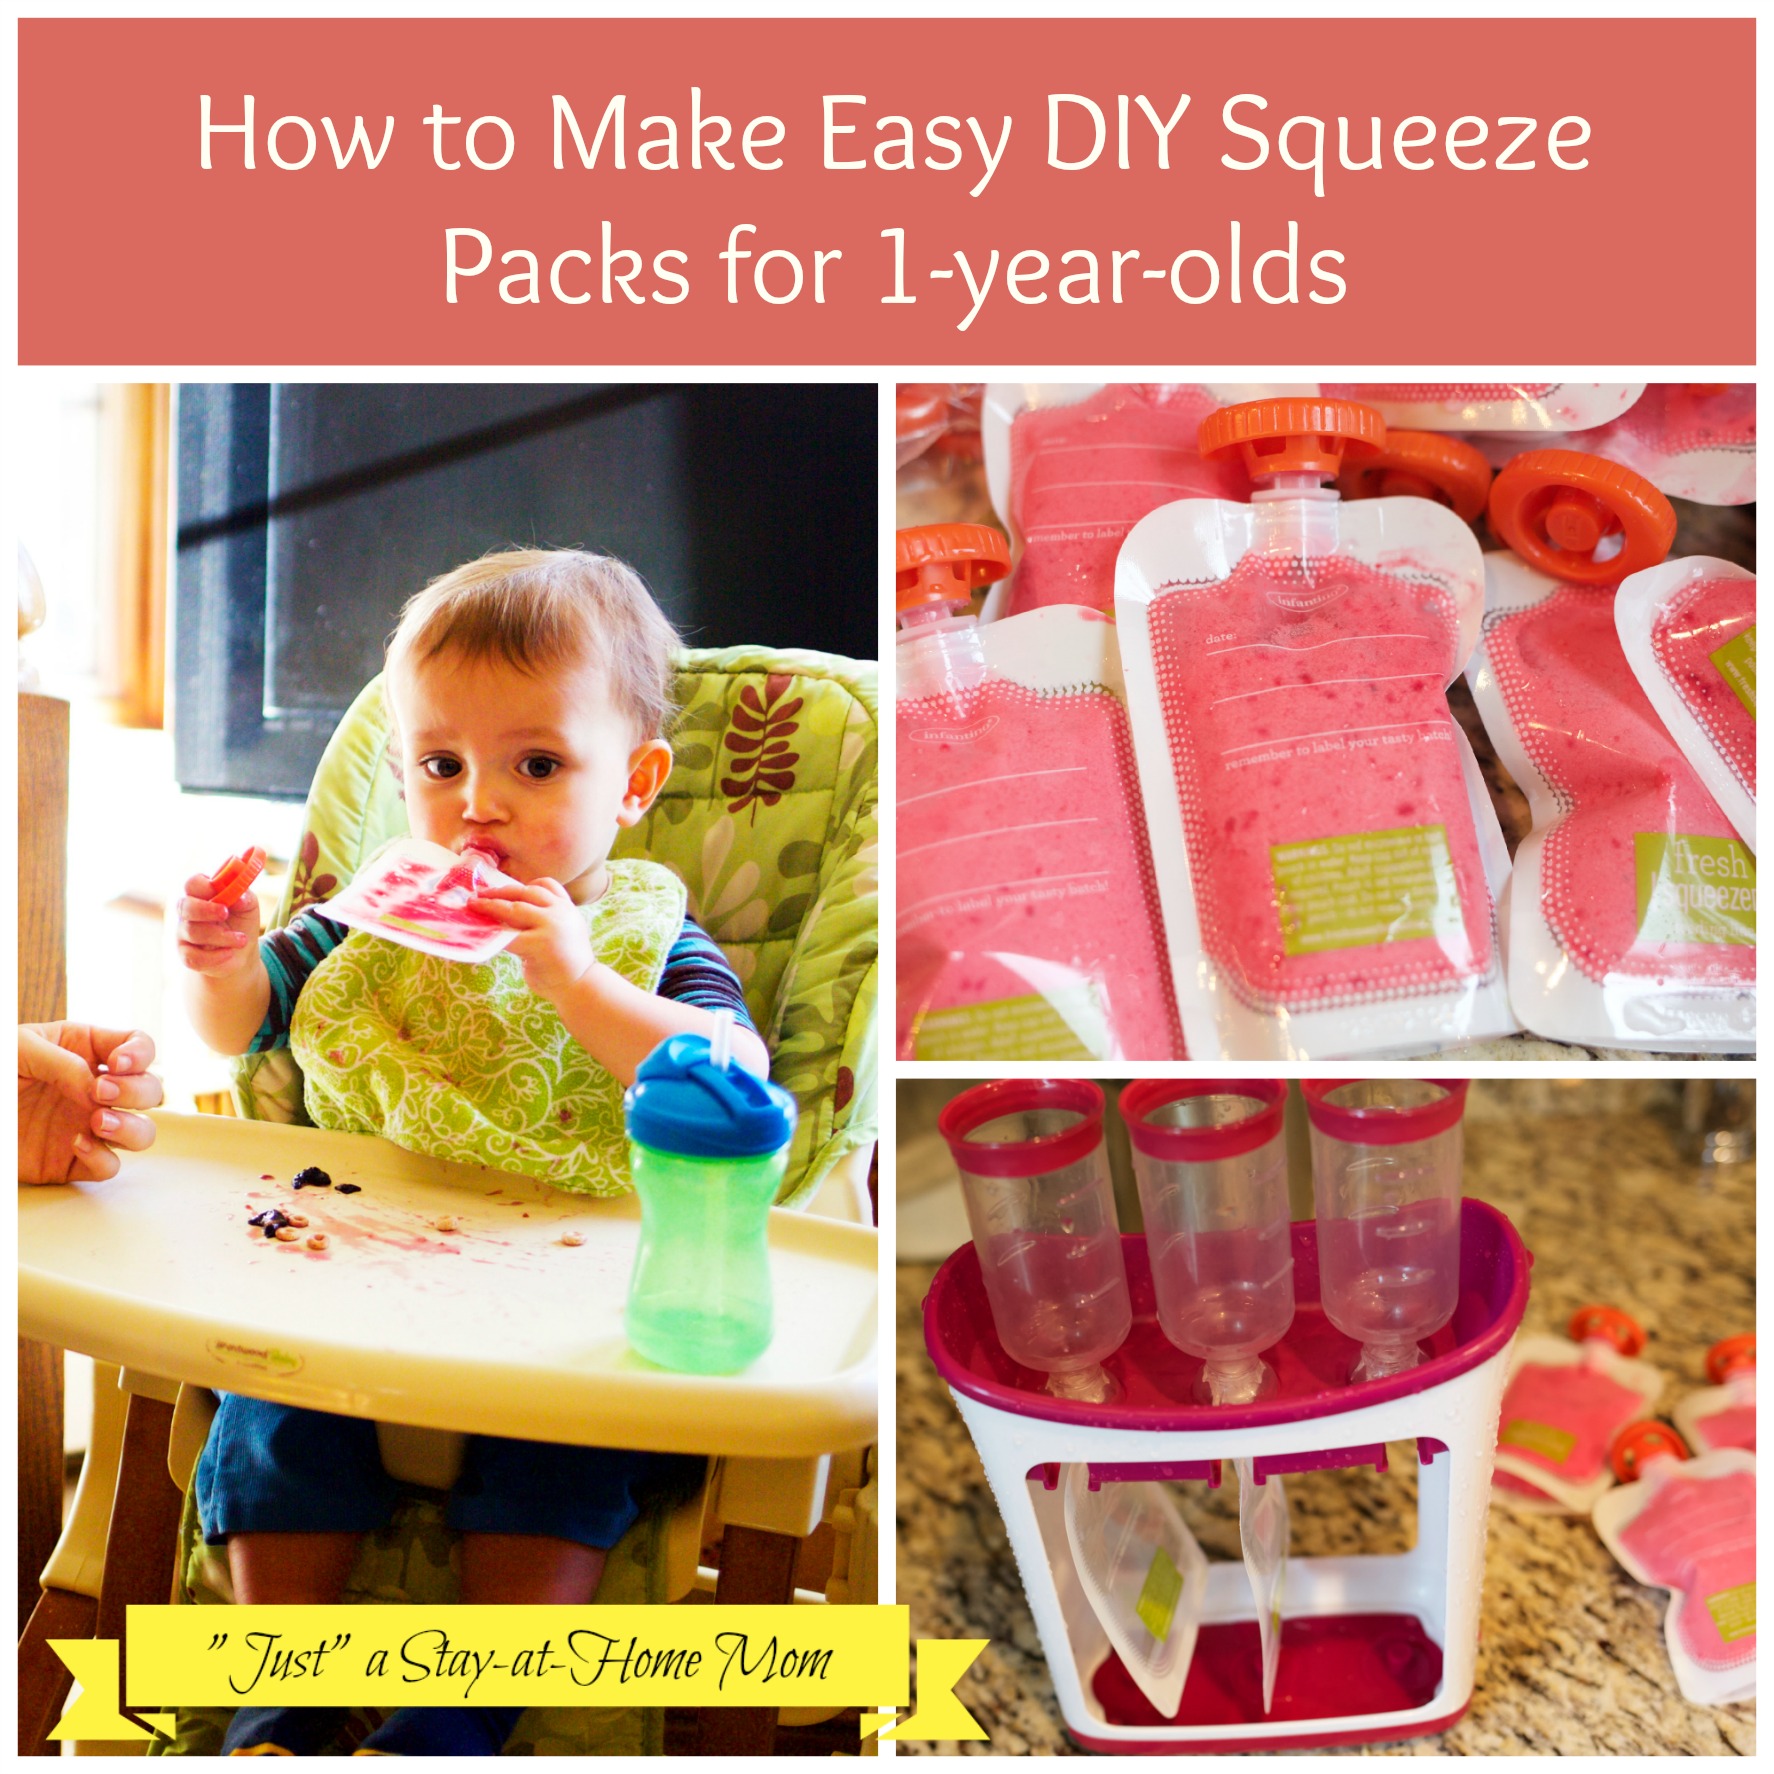 DIY baby squeeze packs for a 1-year-old